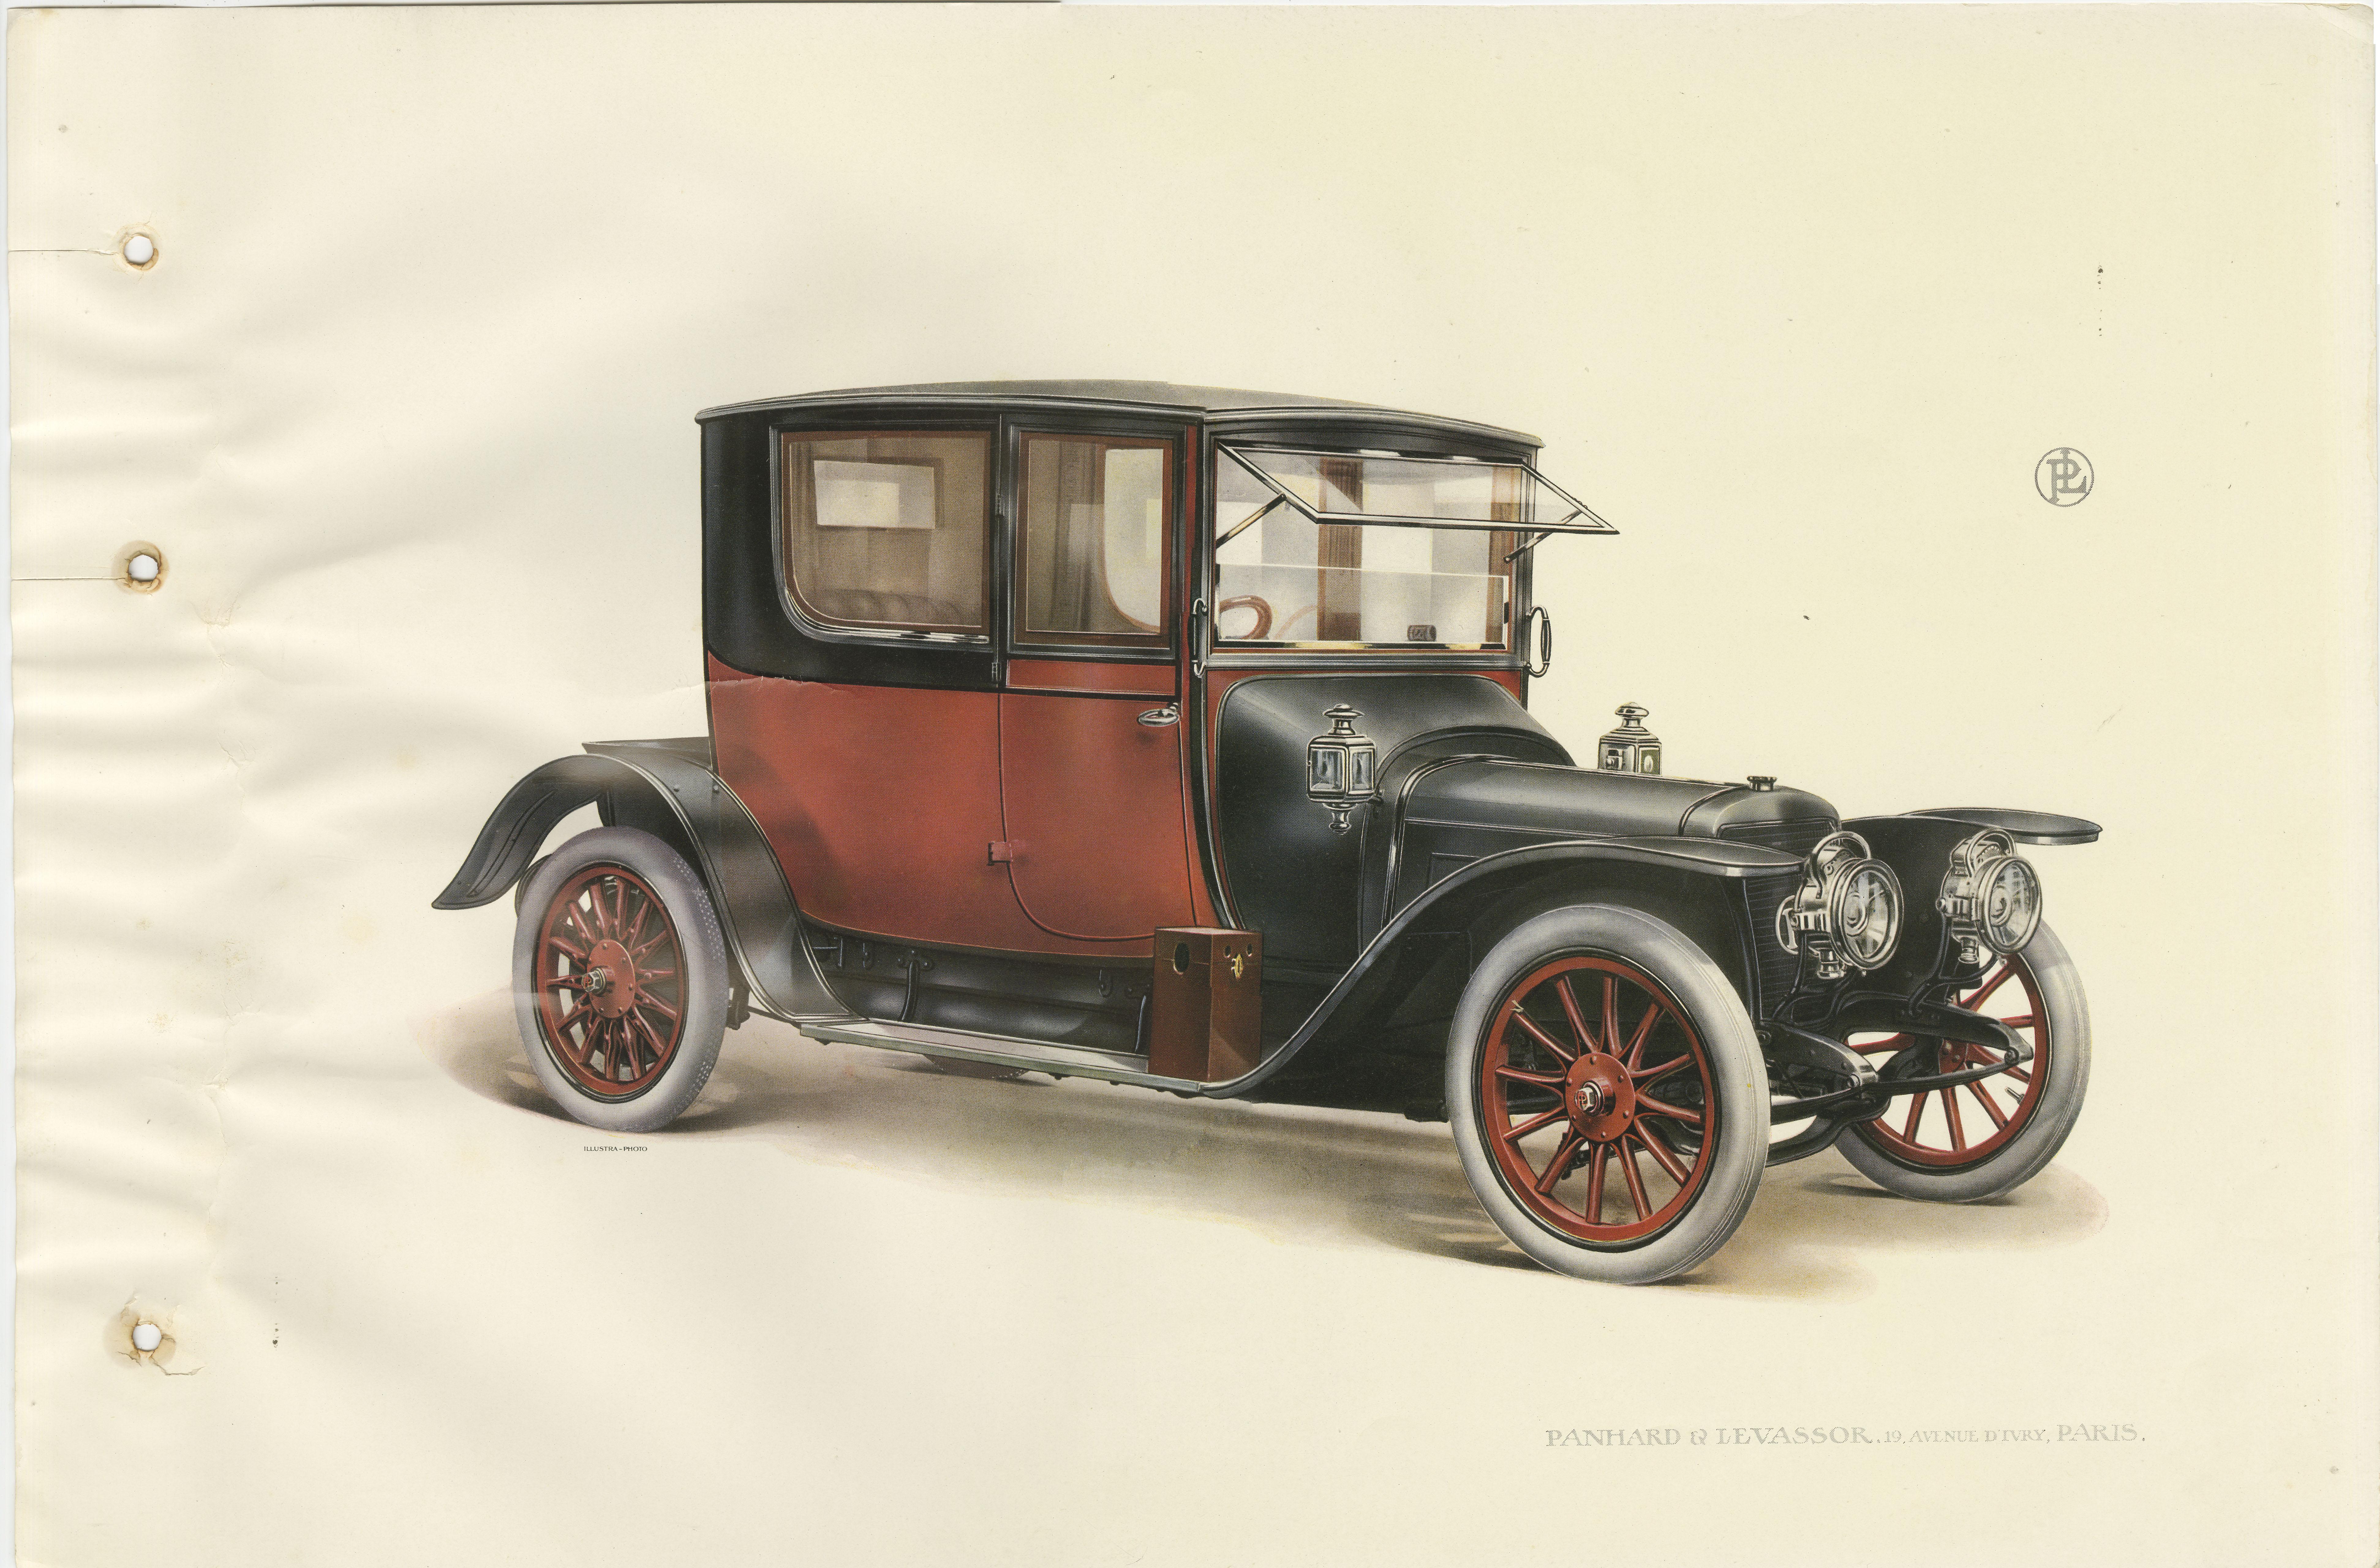 Antique print of a Panhard et Levassor Coupe 4pl Conduite car. This print originates from a rare catalog of the exclusive French brand Panhard & Levassor from 1914.

Panhard was a French motor vehicle manufacturer that began as one of the first